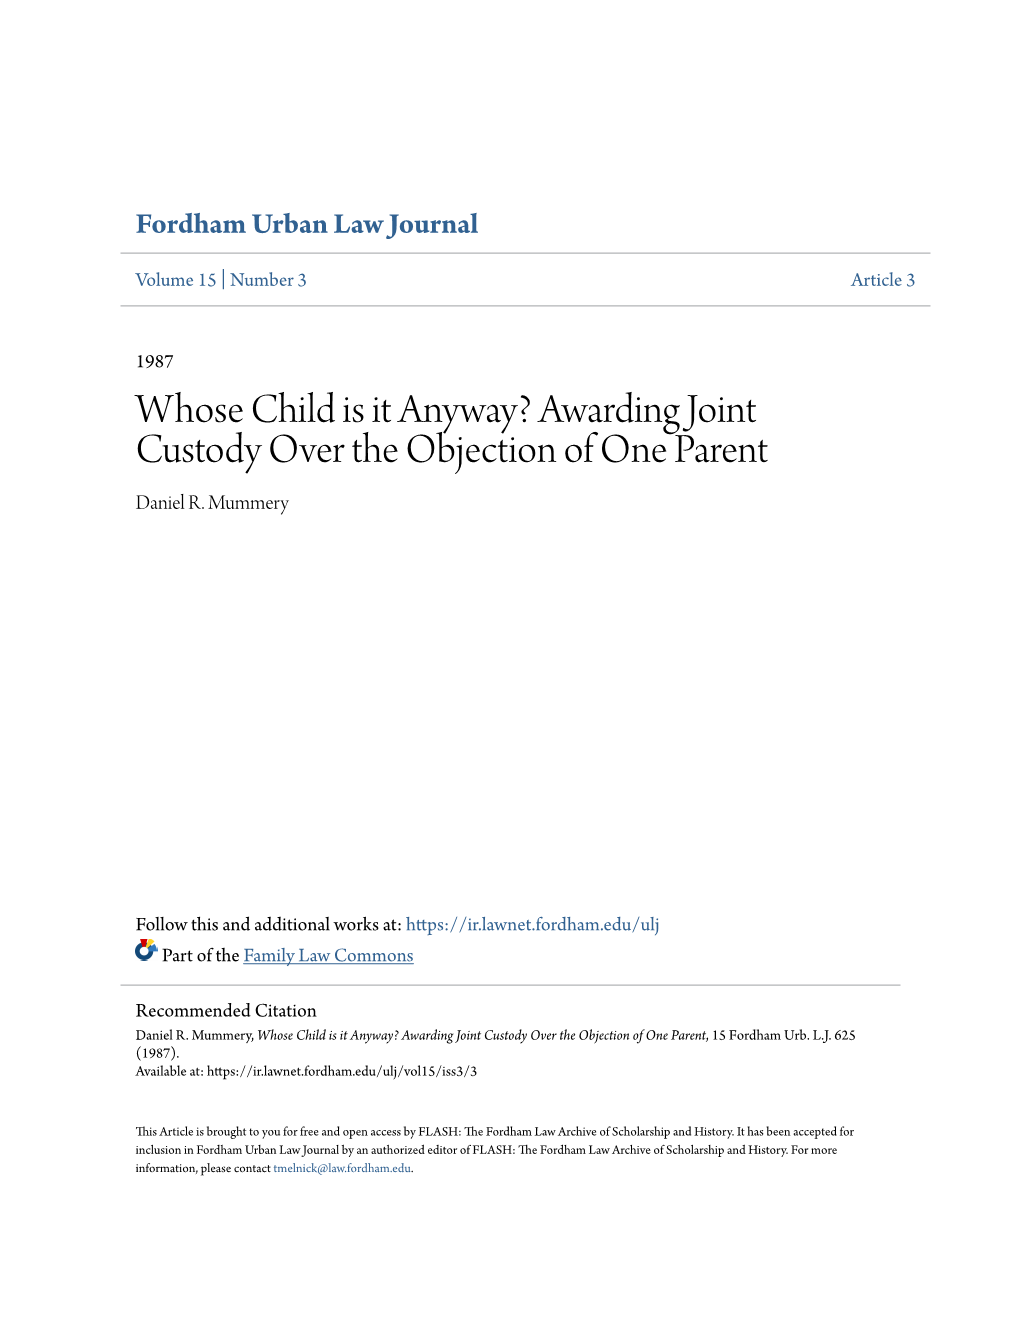 Whose Child Is It Anyway? Awarding Joint Custody Over the Objection of One Parent Daniel R